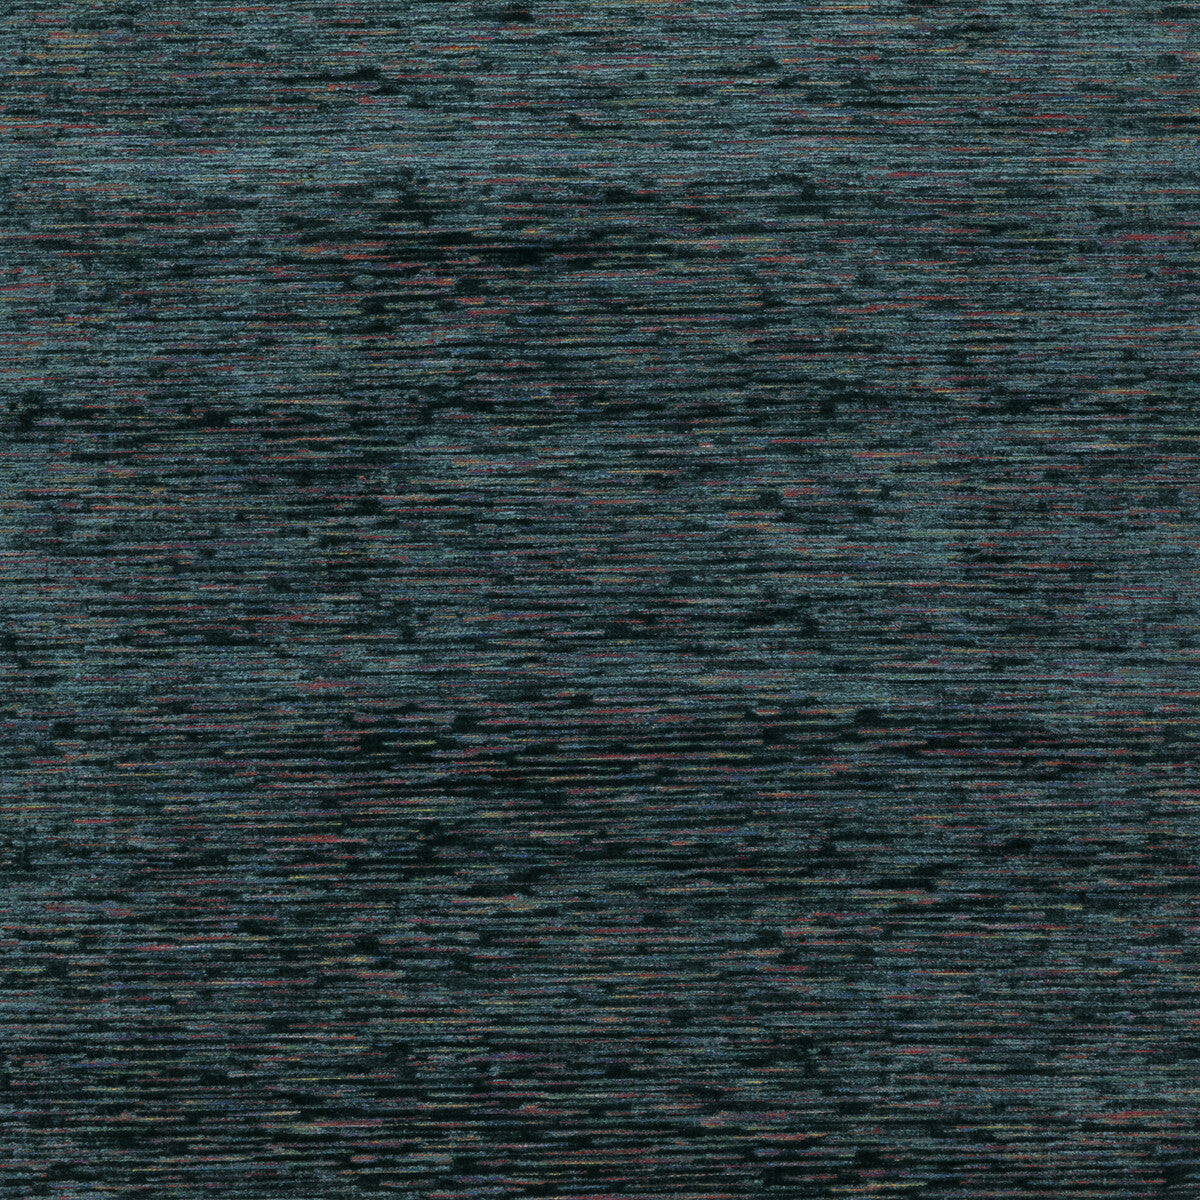 Keswick Velvet fabric in teal color - pattern BF10760.615.0 - by G P &amp; J Baker in the Keswick Velvets collection